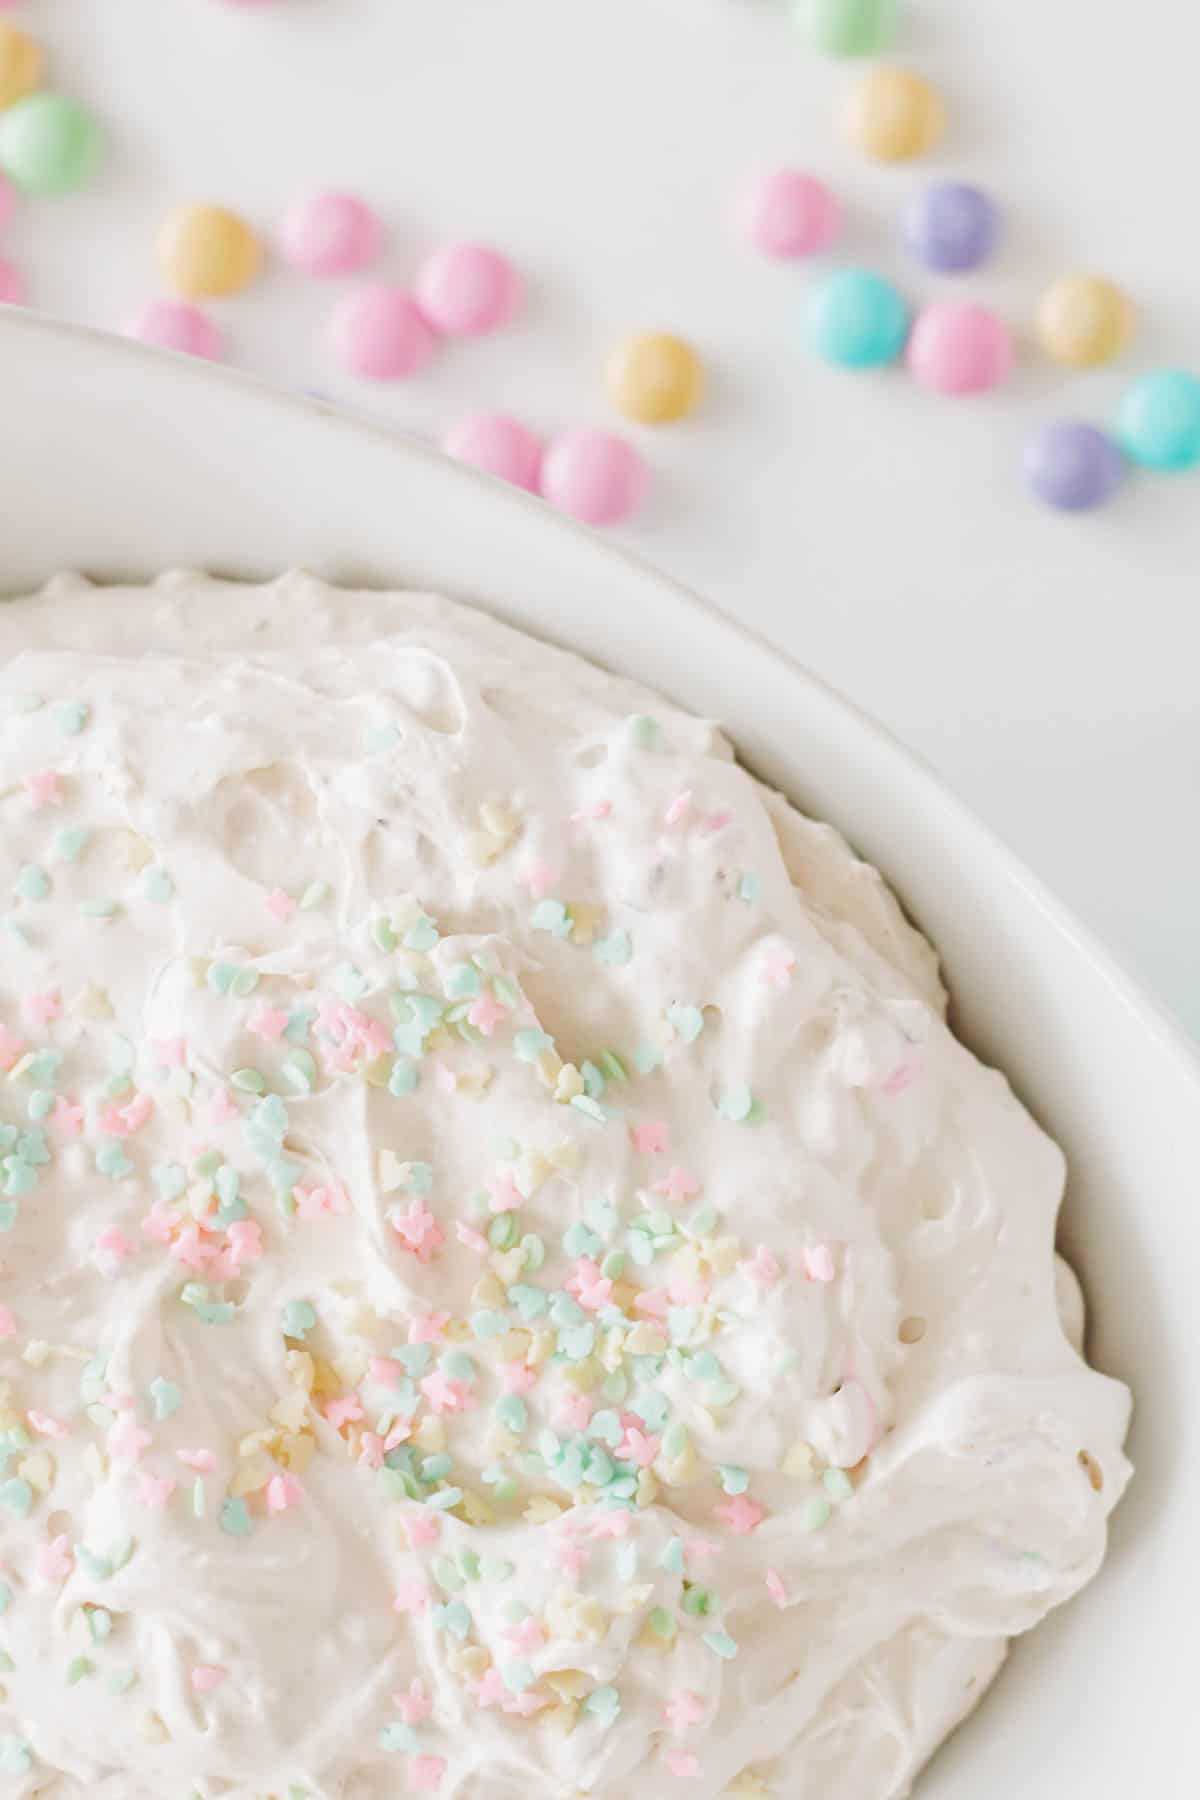 Close up of Easter sprinkles decorating the top of a cake mix dip dessert for Easter.